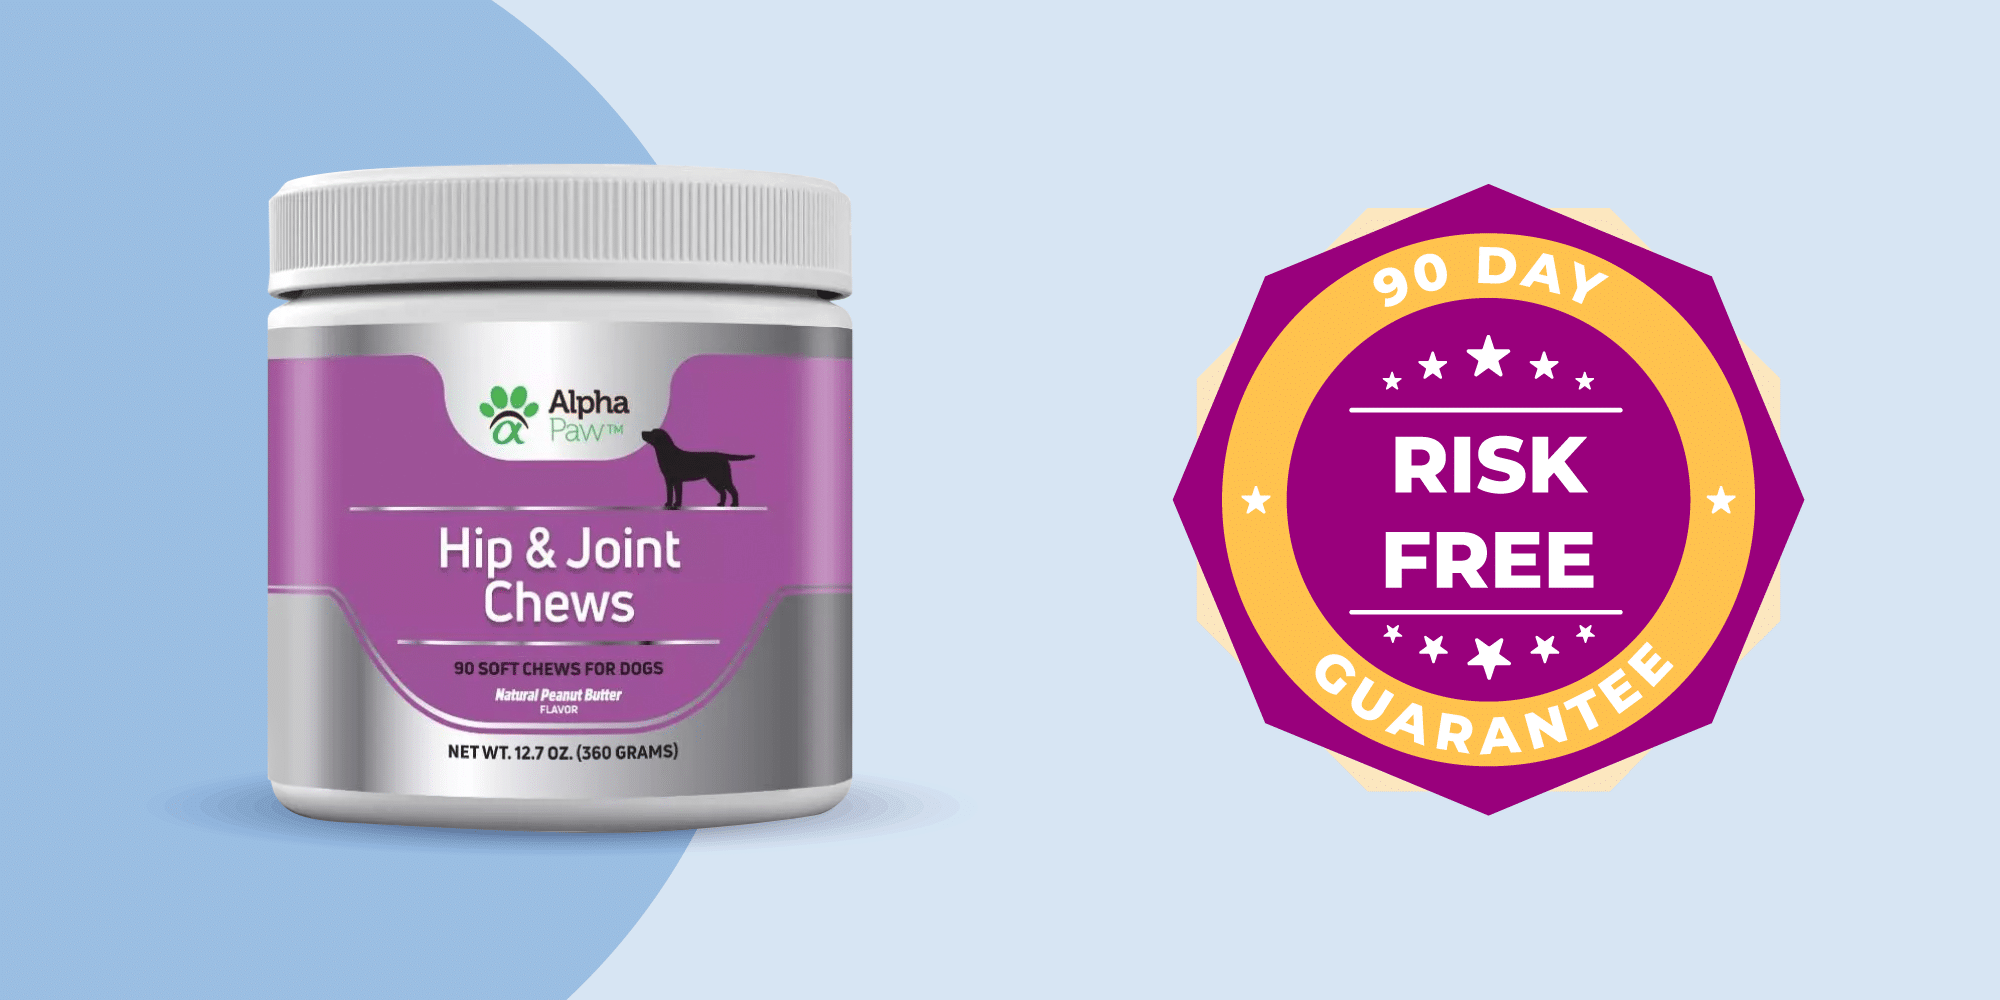 12 reasons to choose alpha paw’s hip and joint chews for dogs